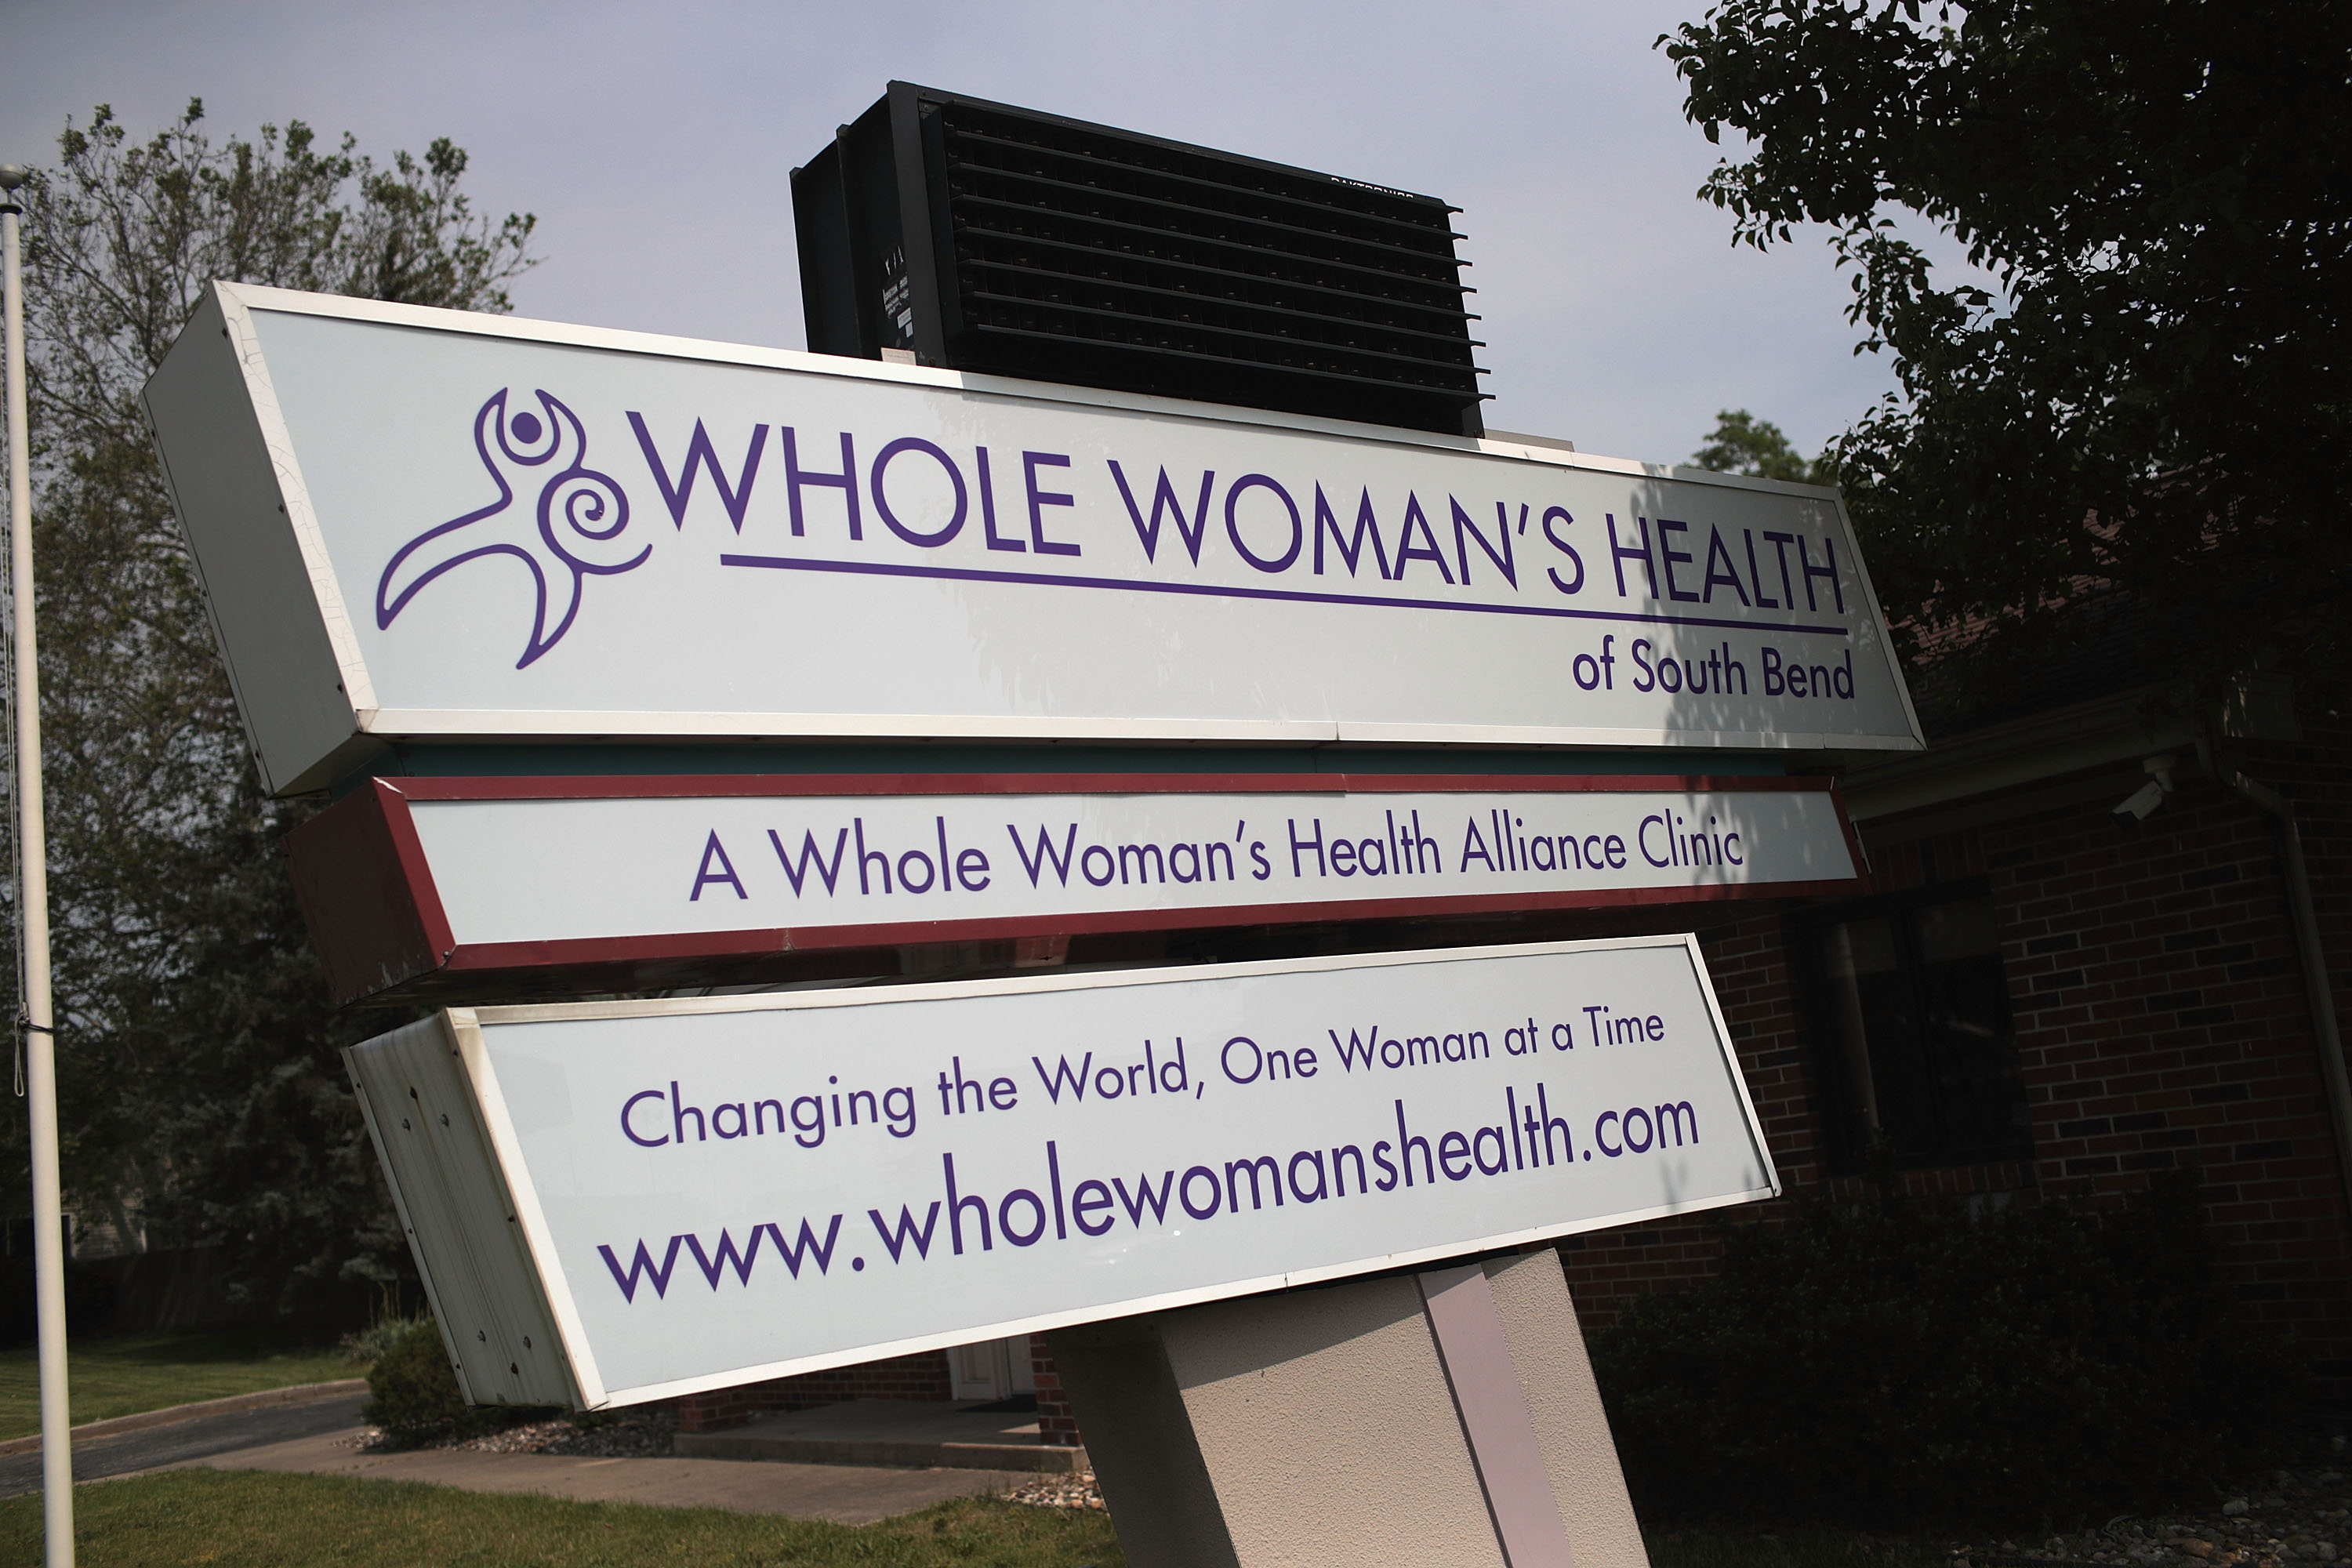 SOUTH BEND, INDIANA - JUNE 19: A sign sits in the front of Whole Woman's Health of South Bend on June 19, 2019 in South Bend, Indiana. The clinic, which provides reproductive healthcare for women including providing abortions is scheduled to open next week following a nearly two-year court battle. Part of the Texas-based nonprofit Whole Woman's Health Alliance, the clinic will offer medication-induced abortions for women who are up to 10 weeks pregnant. (Photo by Scott Olson/Getty Images)